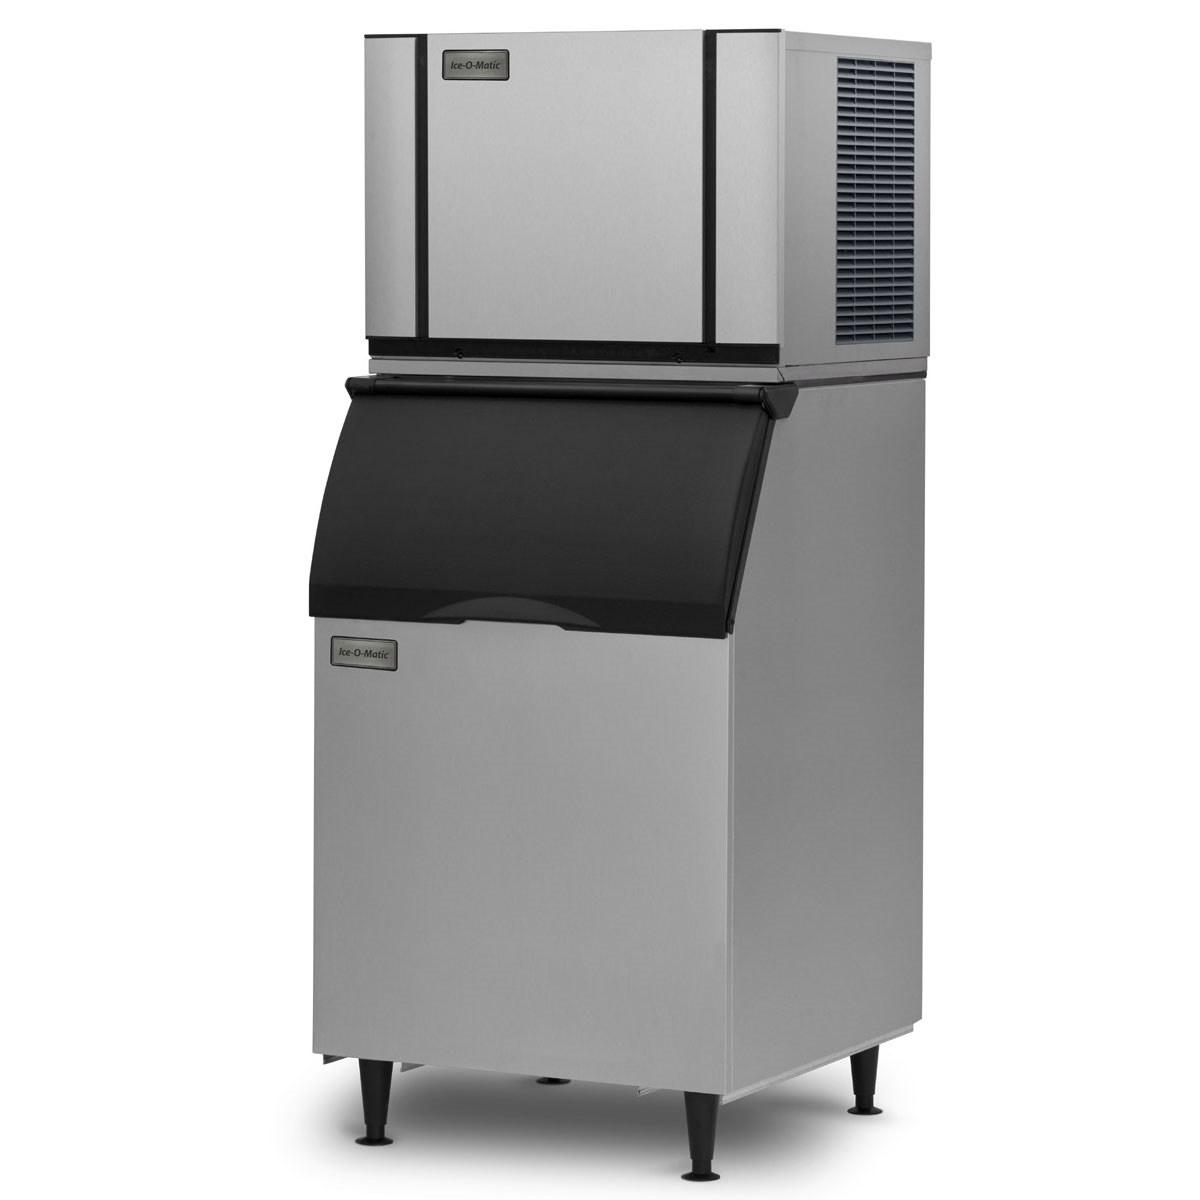 Ice-O-Matic CIM0430HW-B40PS Cube-Style Ice Maker Plus Ice Bin for Ice Machines